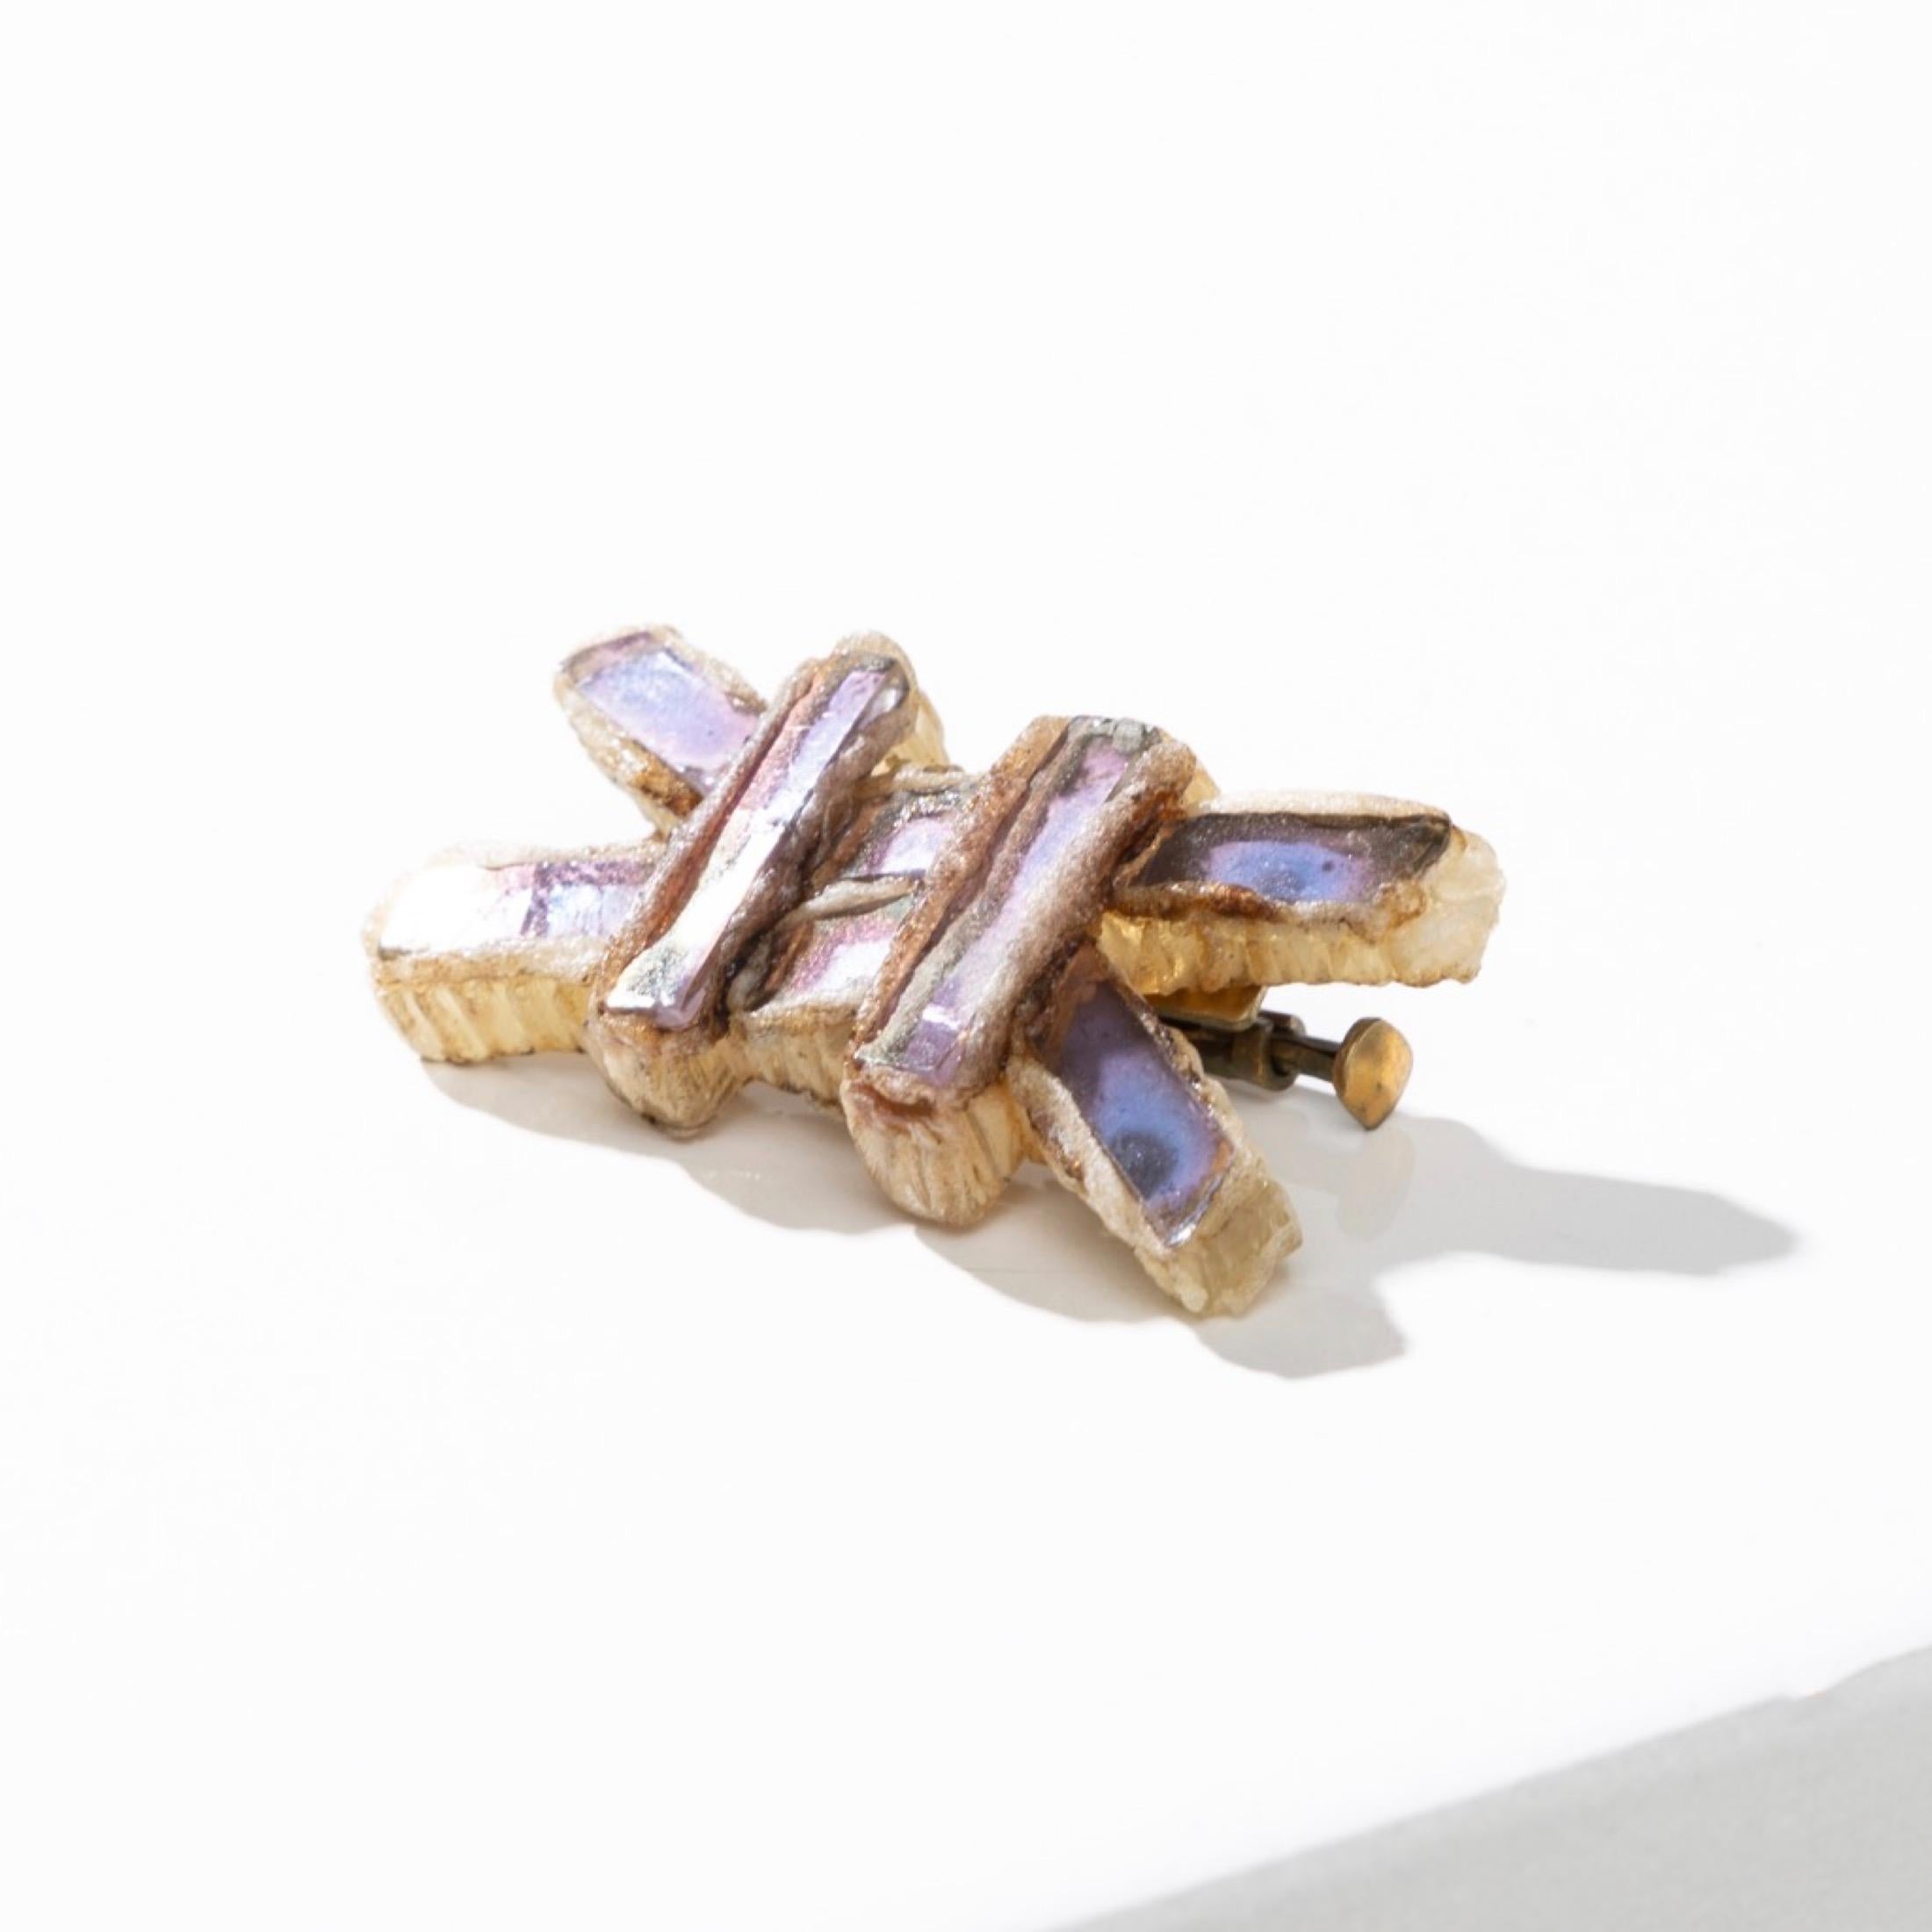 Brooch by Line Vautrin, Beige Talosel Encrusted with Violetts Mirrors 1